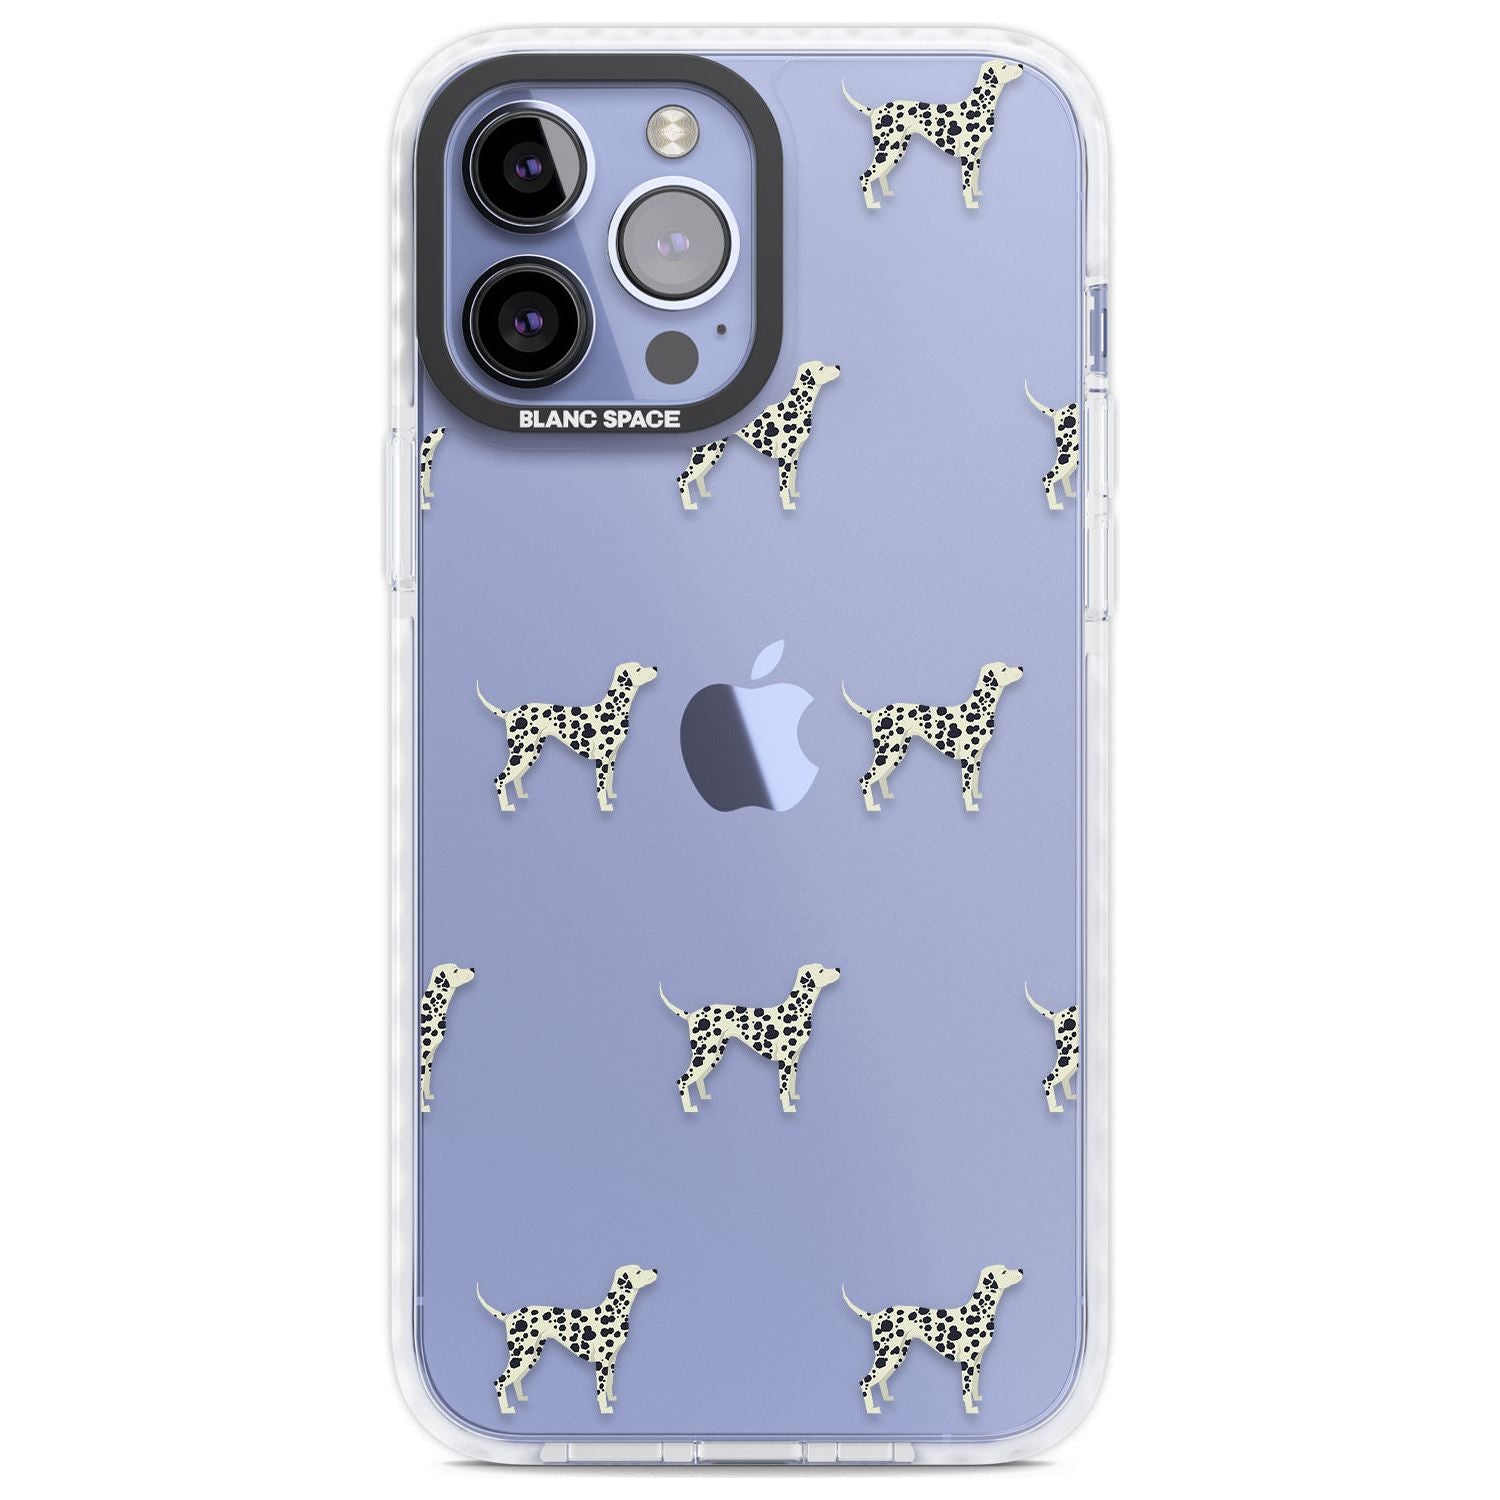 Dalmation Dog Pattern Clear Phone Case iPhone 13 Pro Max / Impact Case,iPhone 14 Pro Max / Impact Case Blanc Space